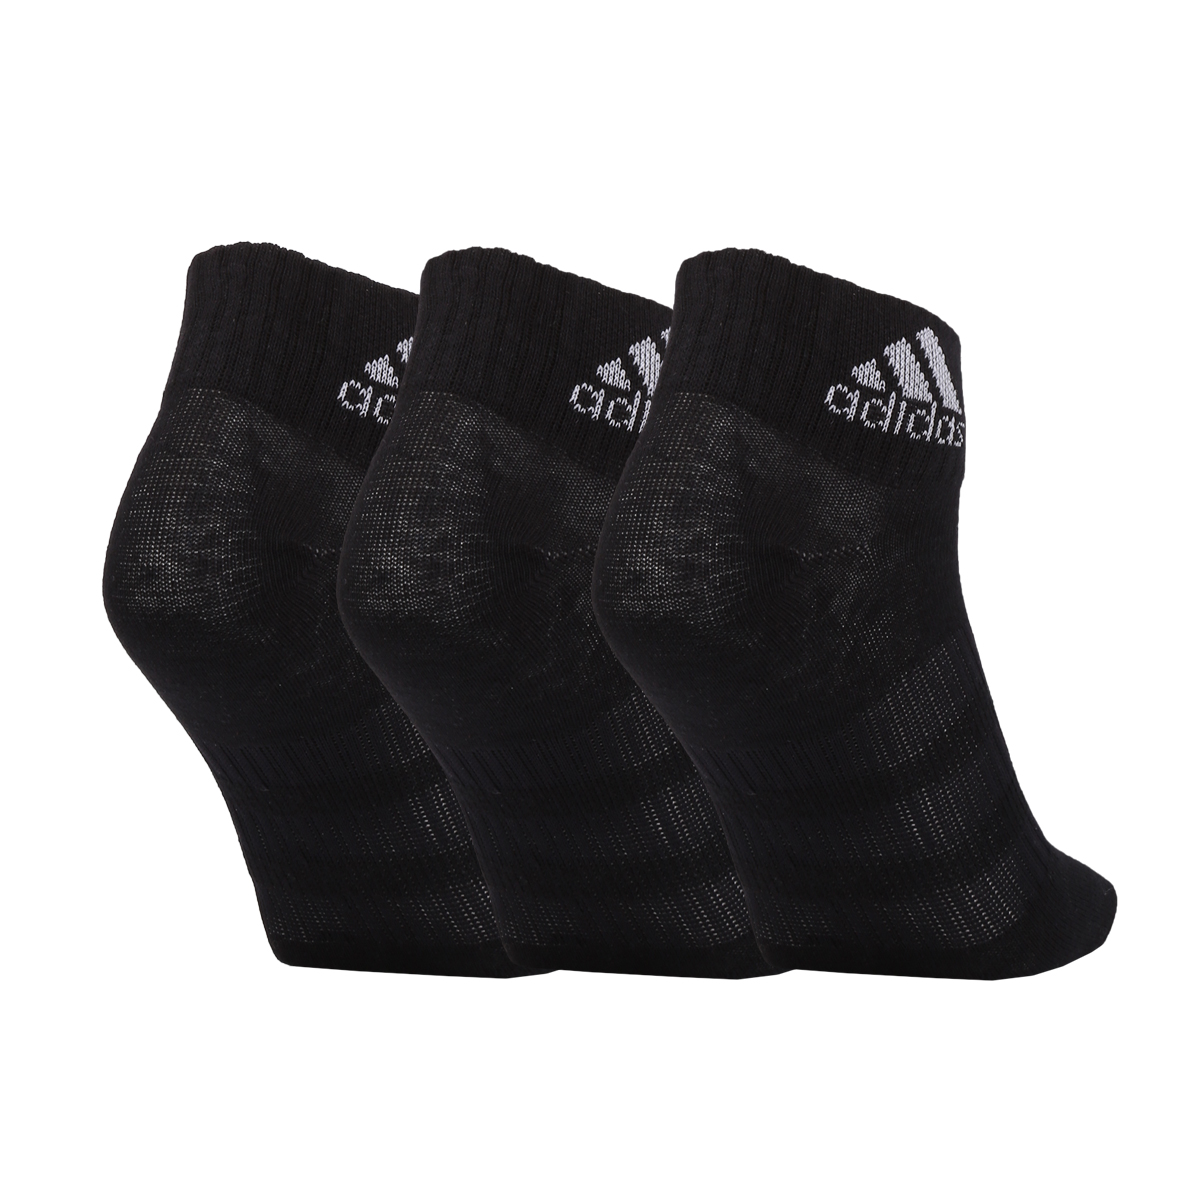 Medias adidas Ankle Light 3 Pares,  image number null